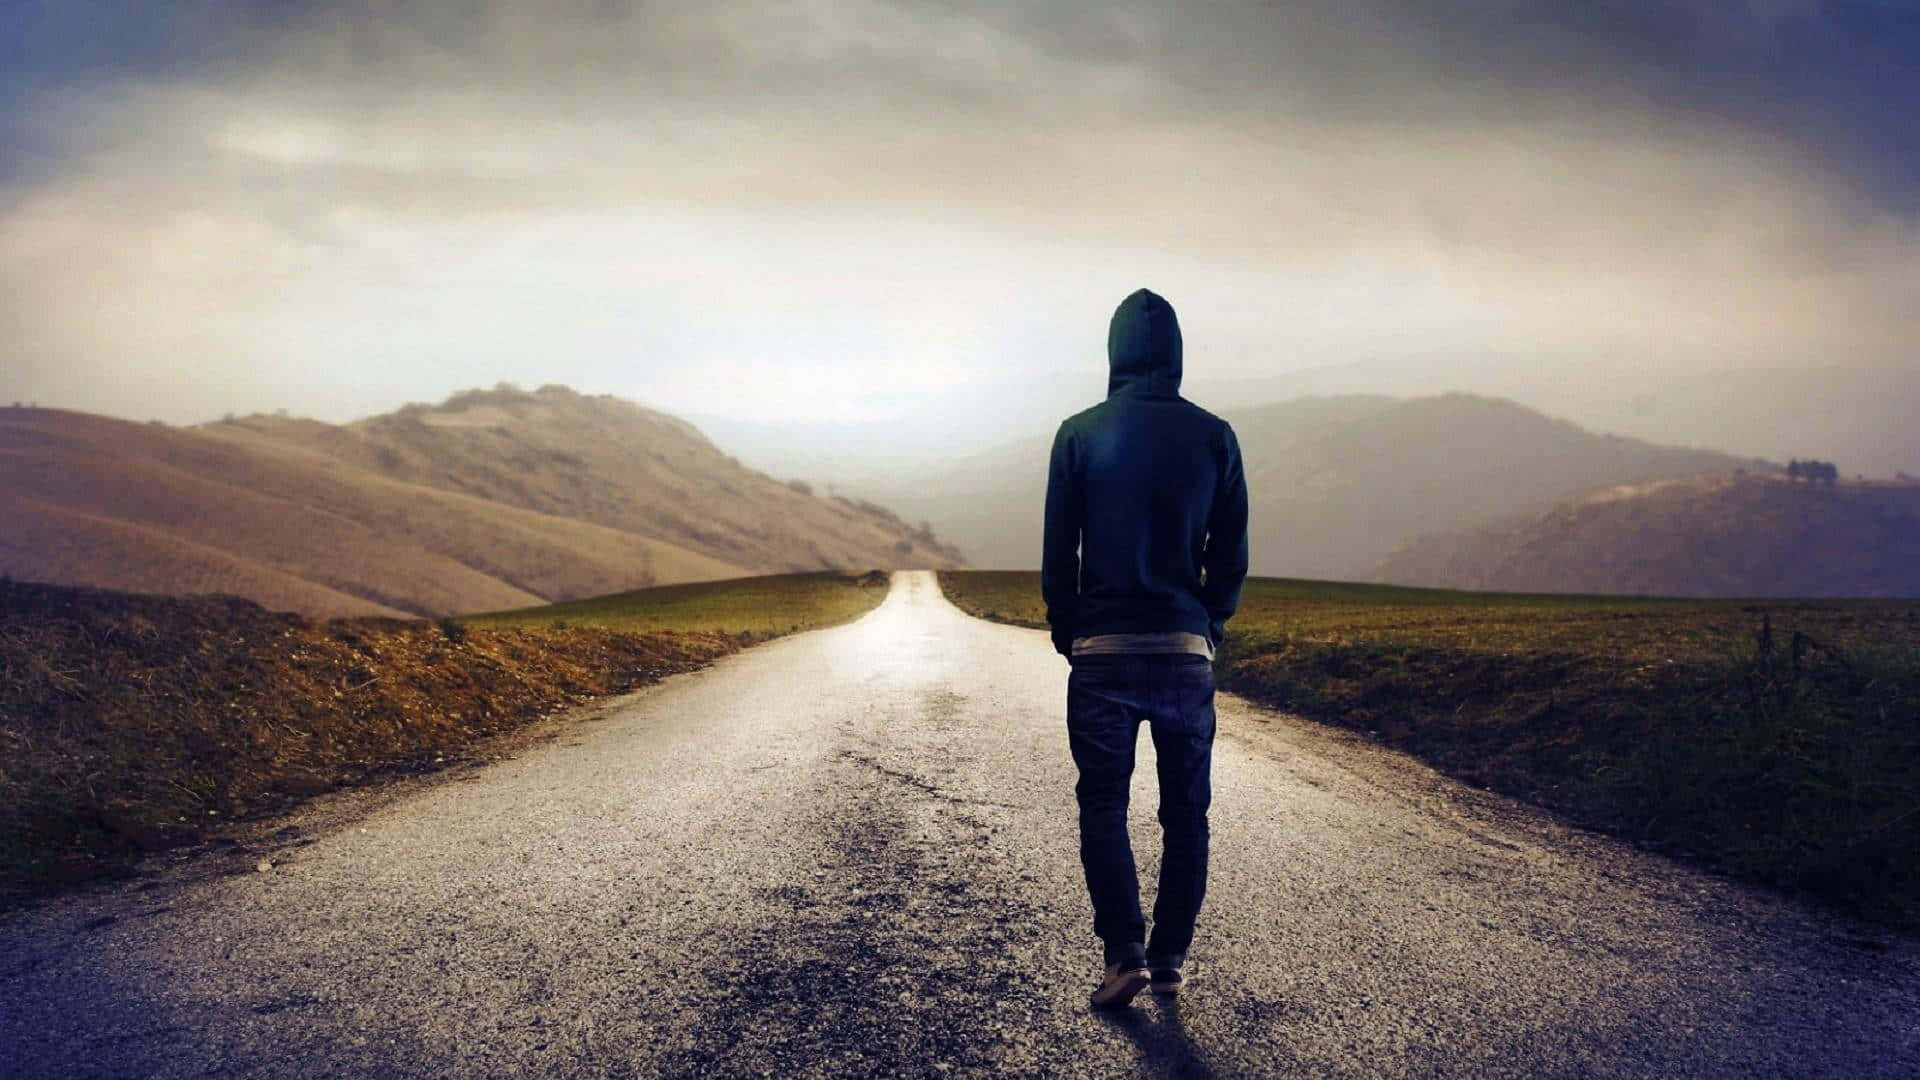 The Country Road Sadness Wallpaper